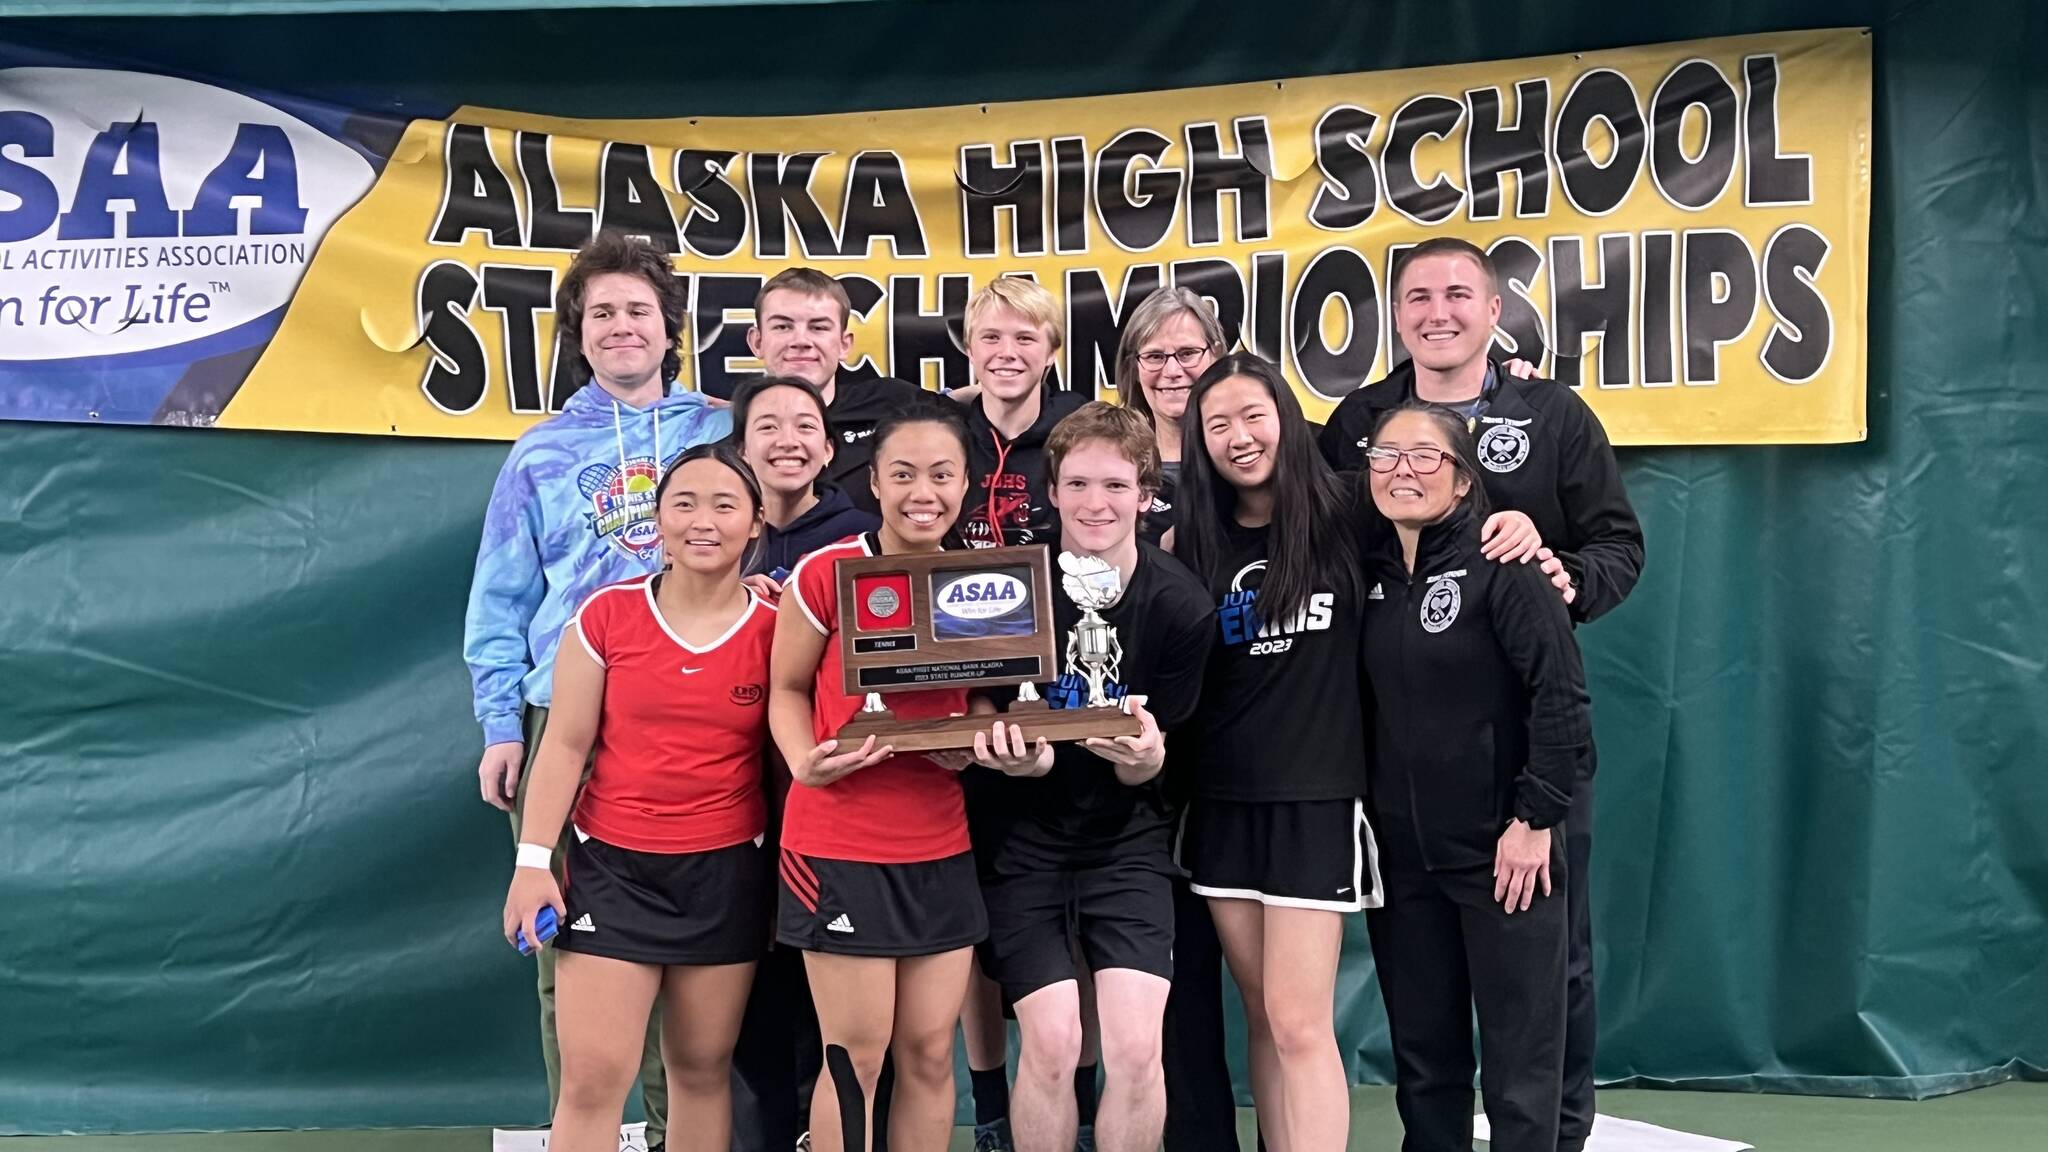 Juneau’s high school tennis team finished second overall in the ASAA Alaska State Tennis Championship that ended Saturday in Anchorage. (Photo courtesy of Mona Mametsuka)